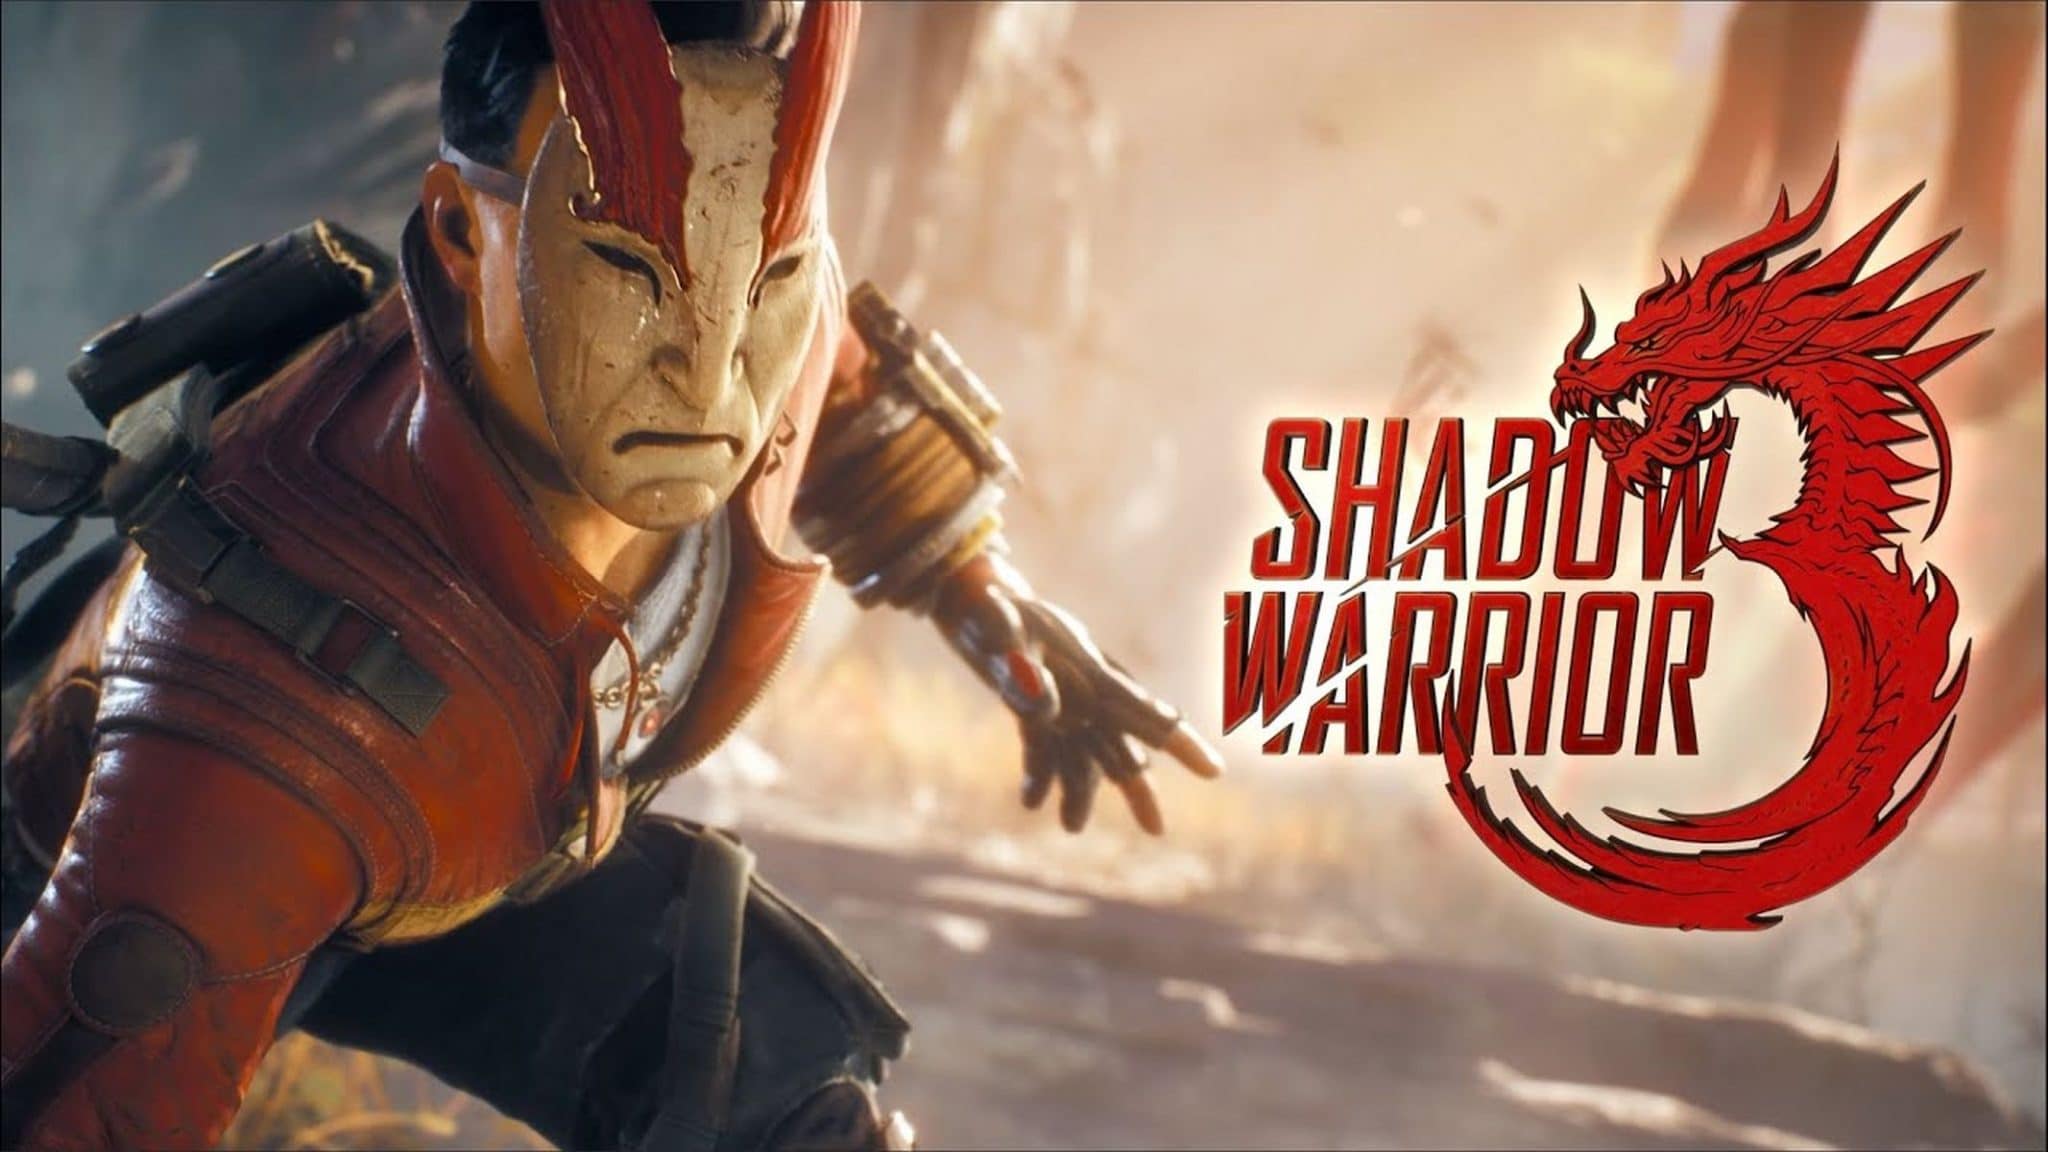 shadow warrior full game download free